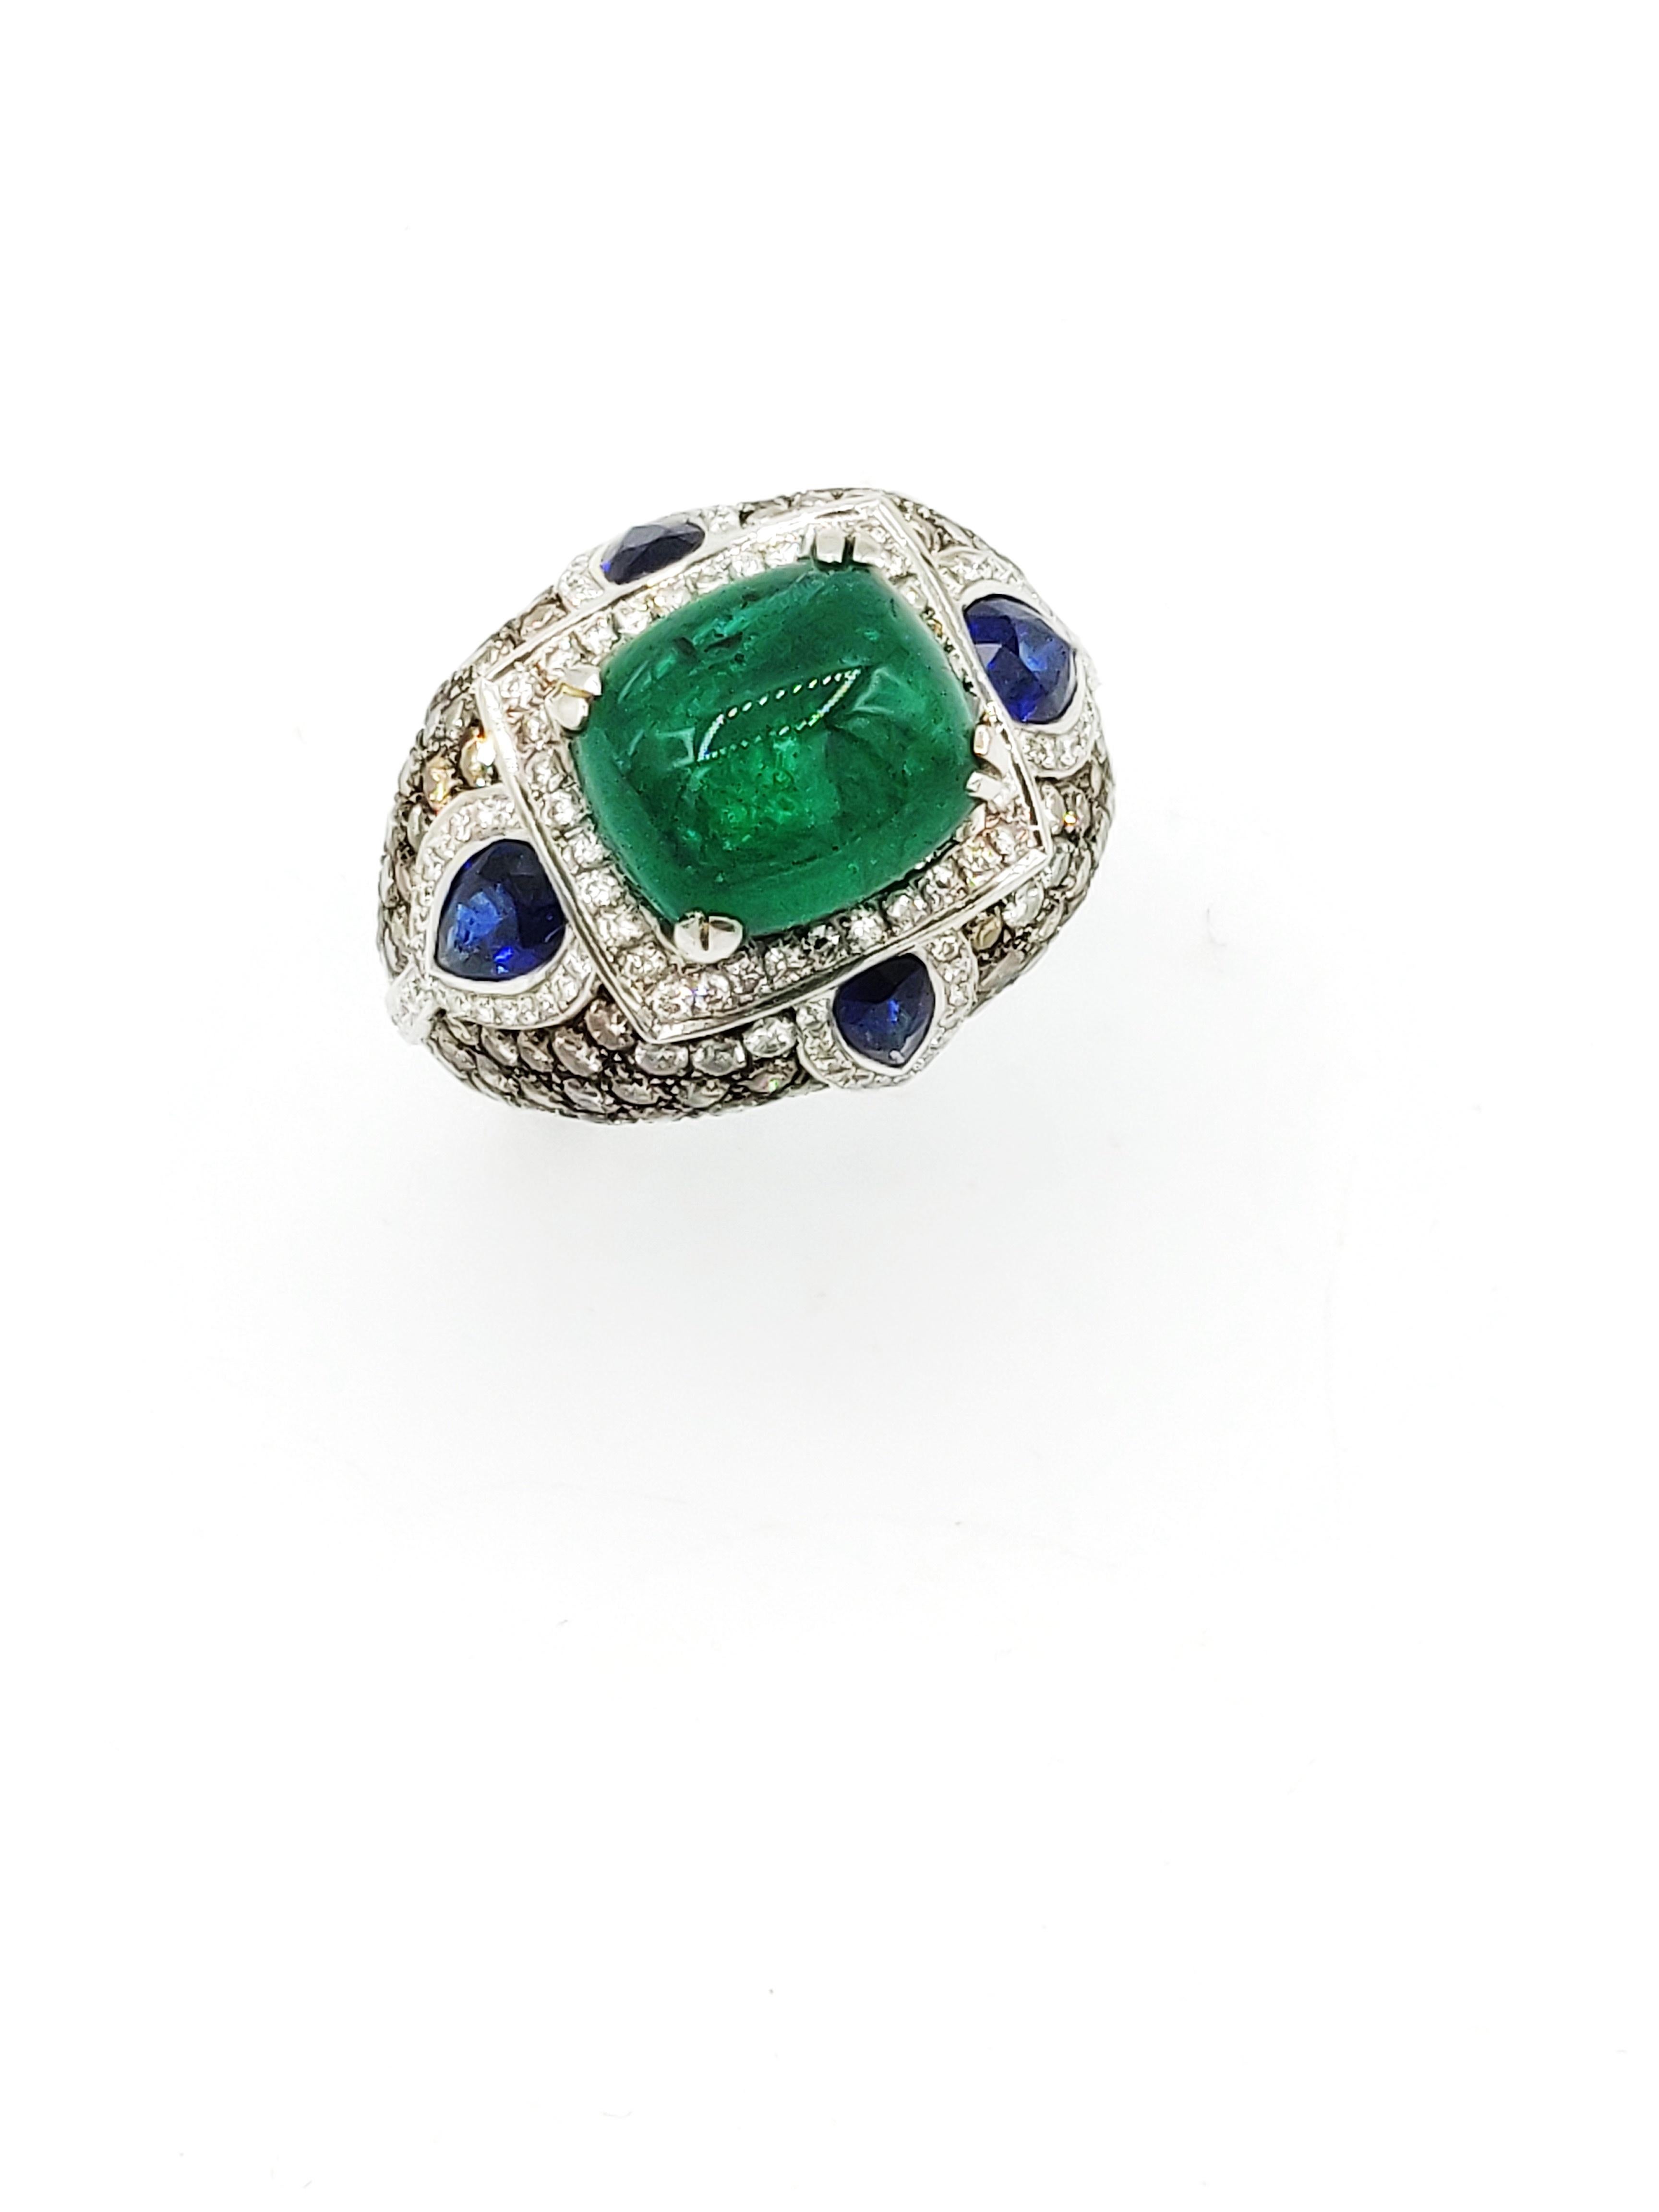 Cabochon Emerald Ring Set in 18K White Gold Embellished with Champagne Diamond and Sapphire Motif

Ring size: UK M, US 6 1/2, 53

Gold: White Gold 14.64g.
Emerald: 4.32ct.
Sapphire: 1.62ct.
White Diamond: 0.22ct.
Champagne Diamond: 2.11ct.